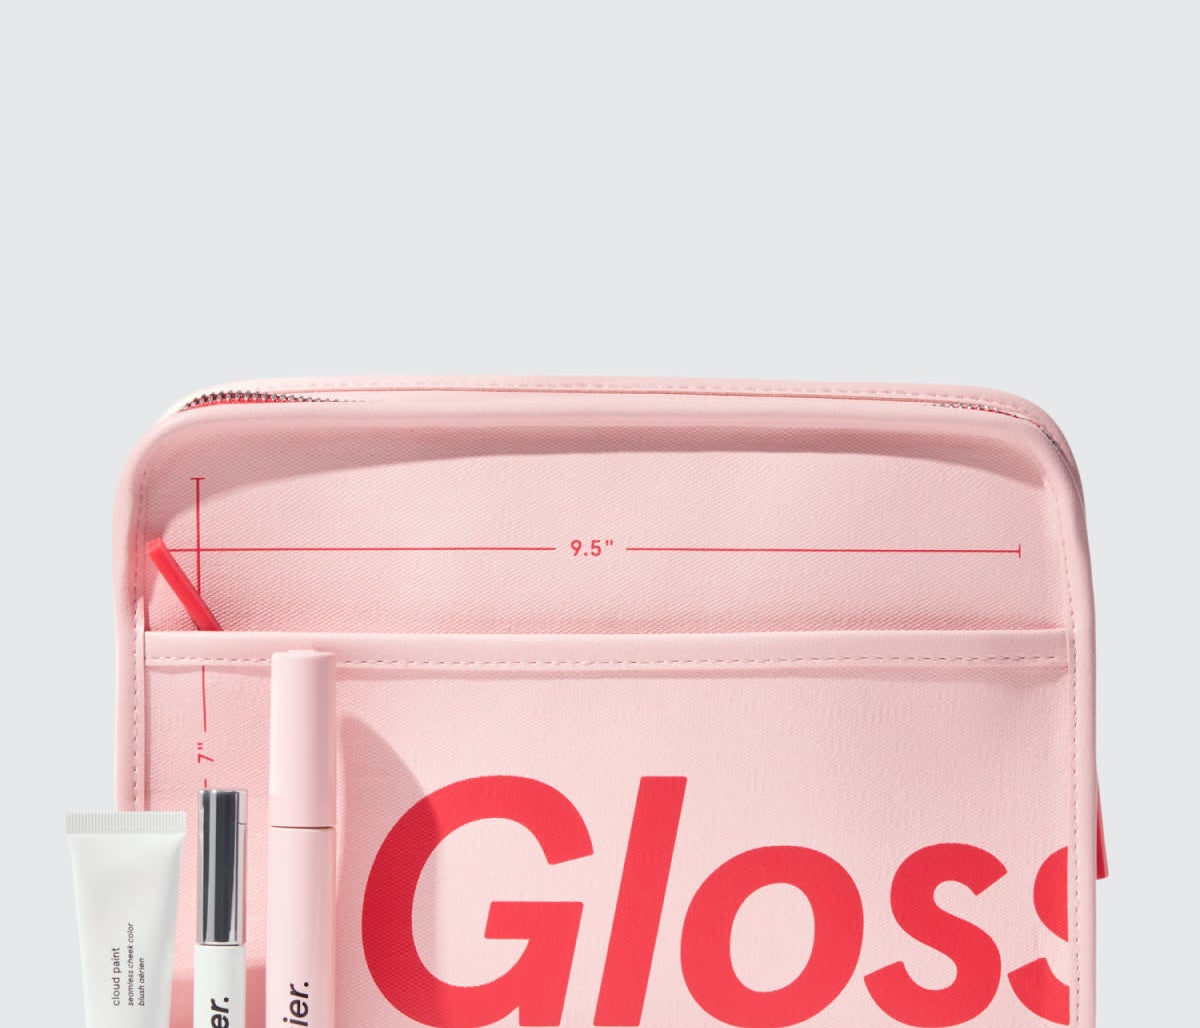 The pink and red makeup bag and beauty products